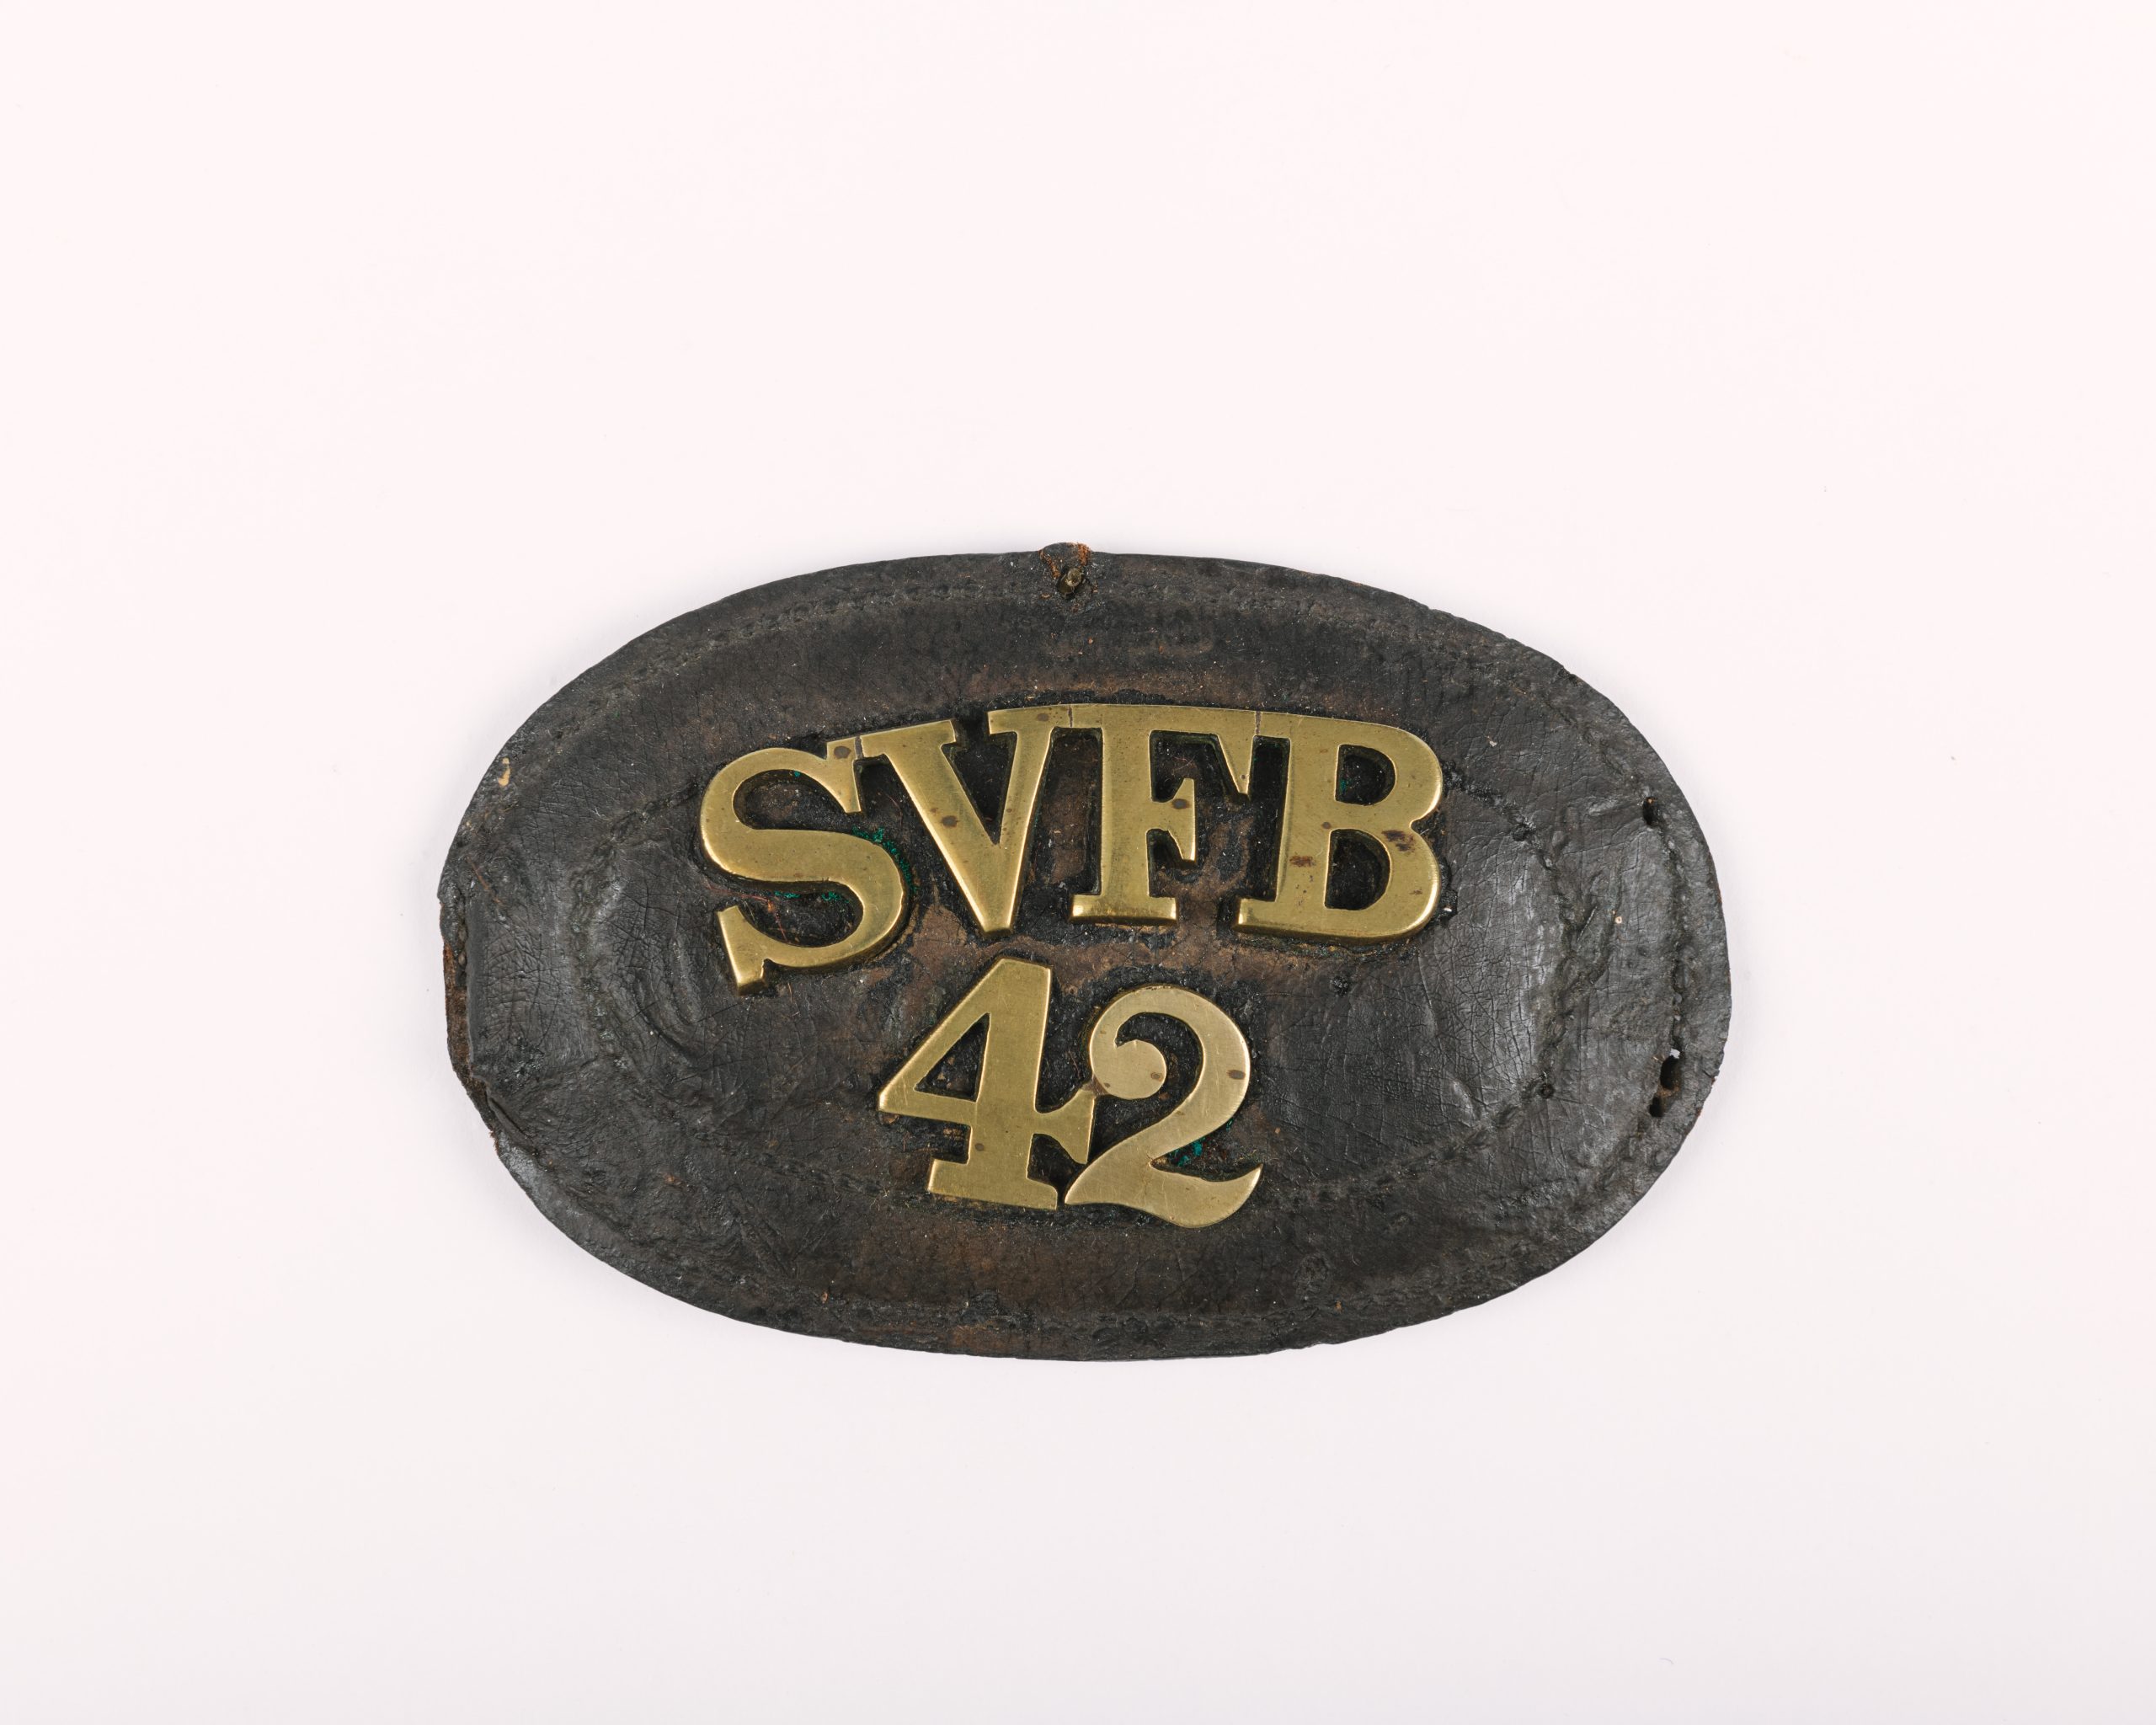 Oval badge with Gold lettering. Inscription reads SVFB 42